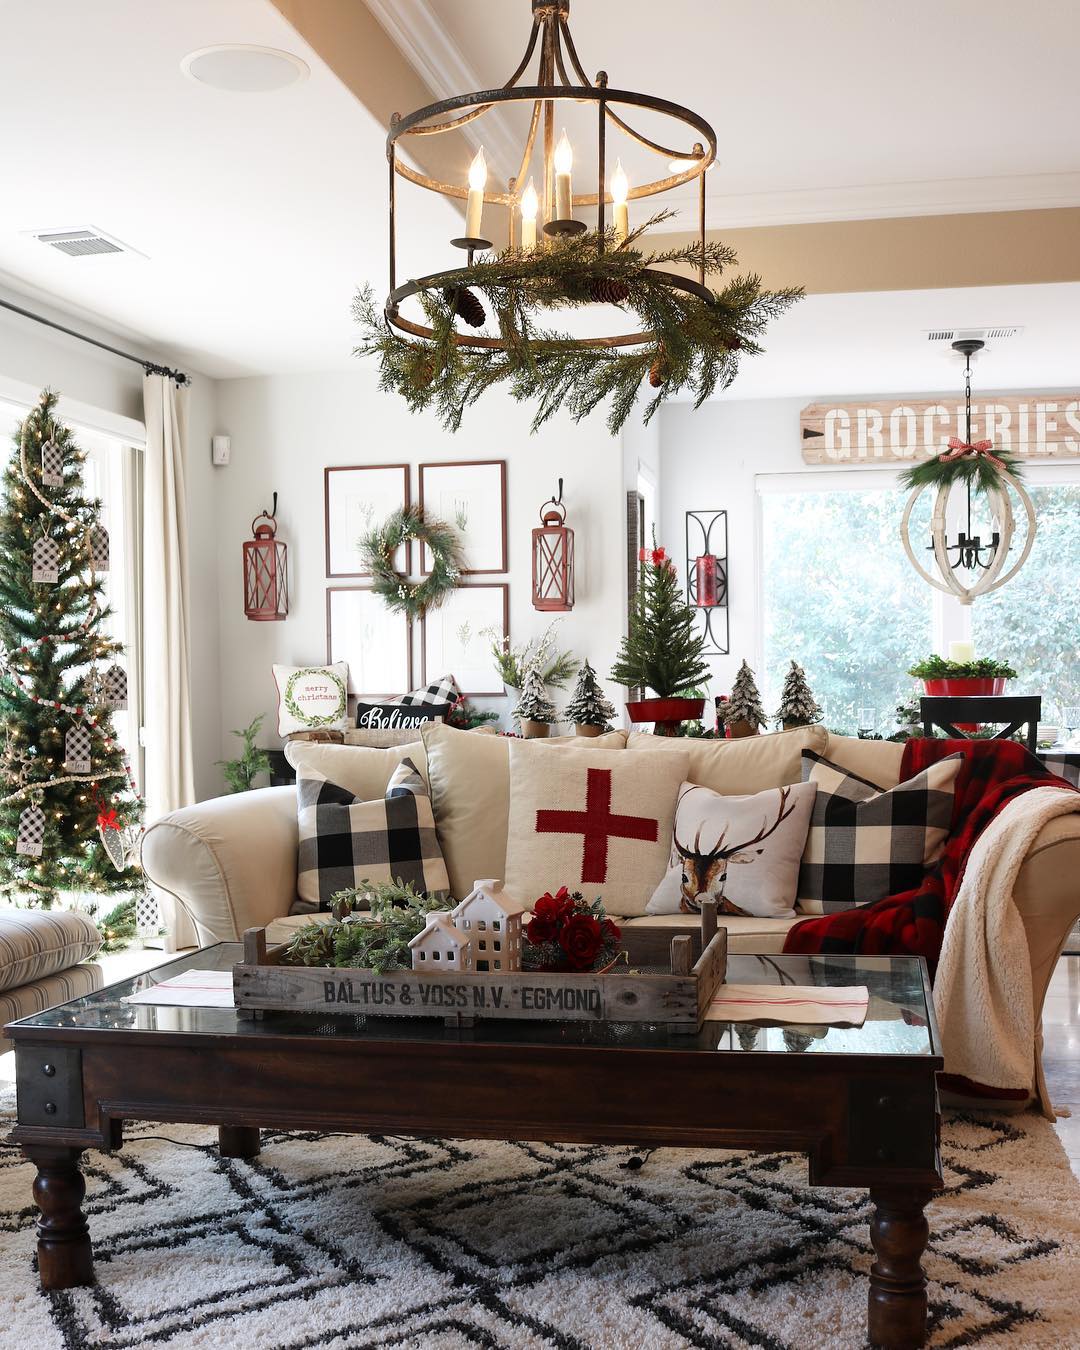 9 Indoor Christmas Decorations To Give Your Home That Holiday Spirit ...